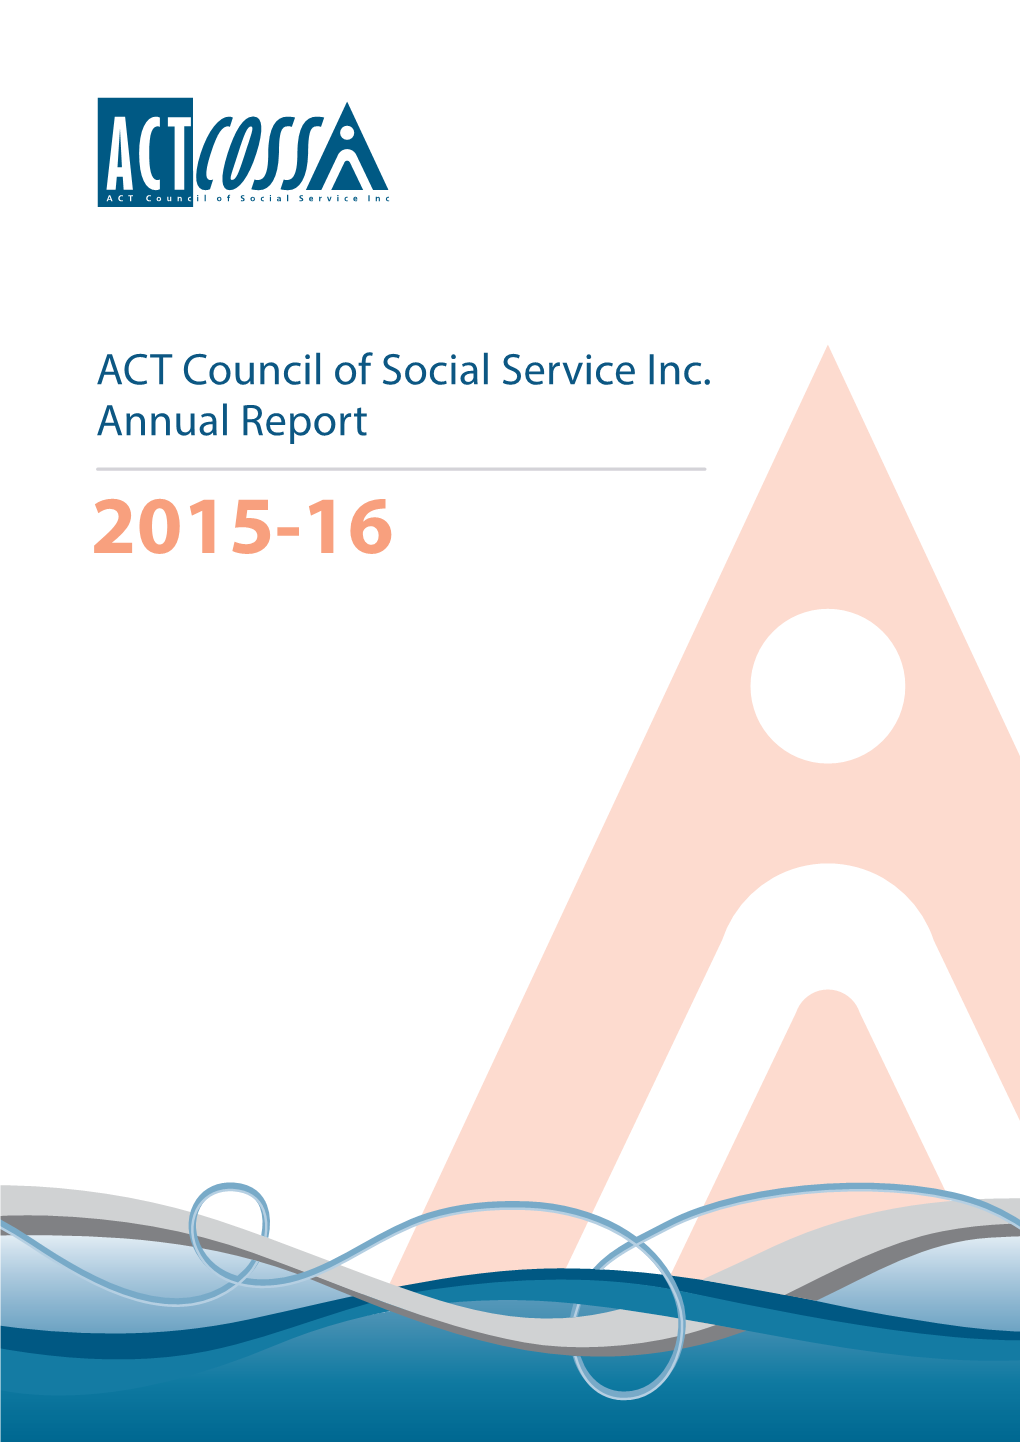 ACT Council of Social Service Inc. Annual Report